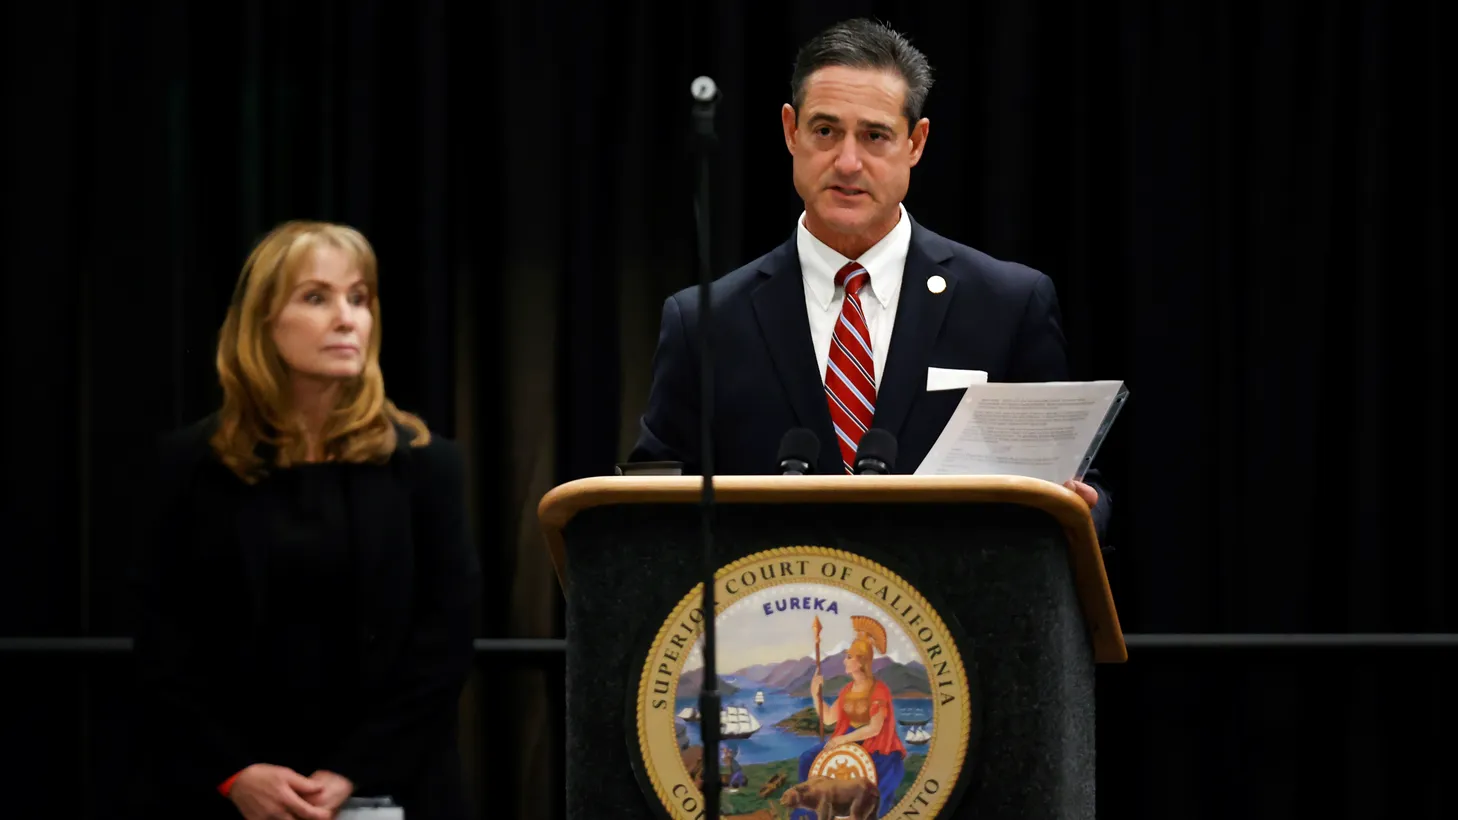 Orange County District Attorney Todd Spitzer speaks during a hearing against former police officer Joseph James DeAngelo Jr. on crimes attributed to the Golden State Killer, at the Sacramento County courtroom, in Sacramento, California, U.S., June 29, 2020.